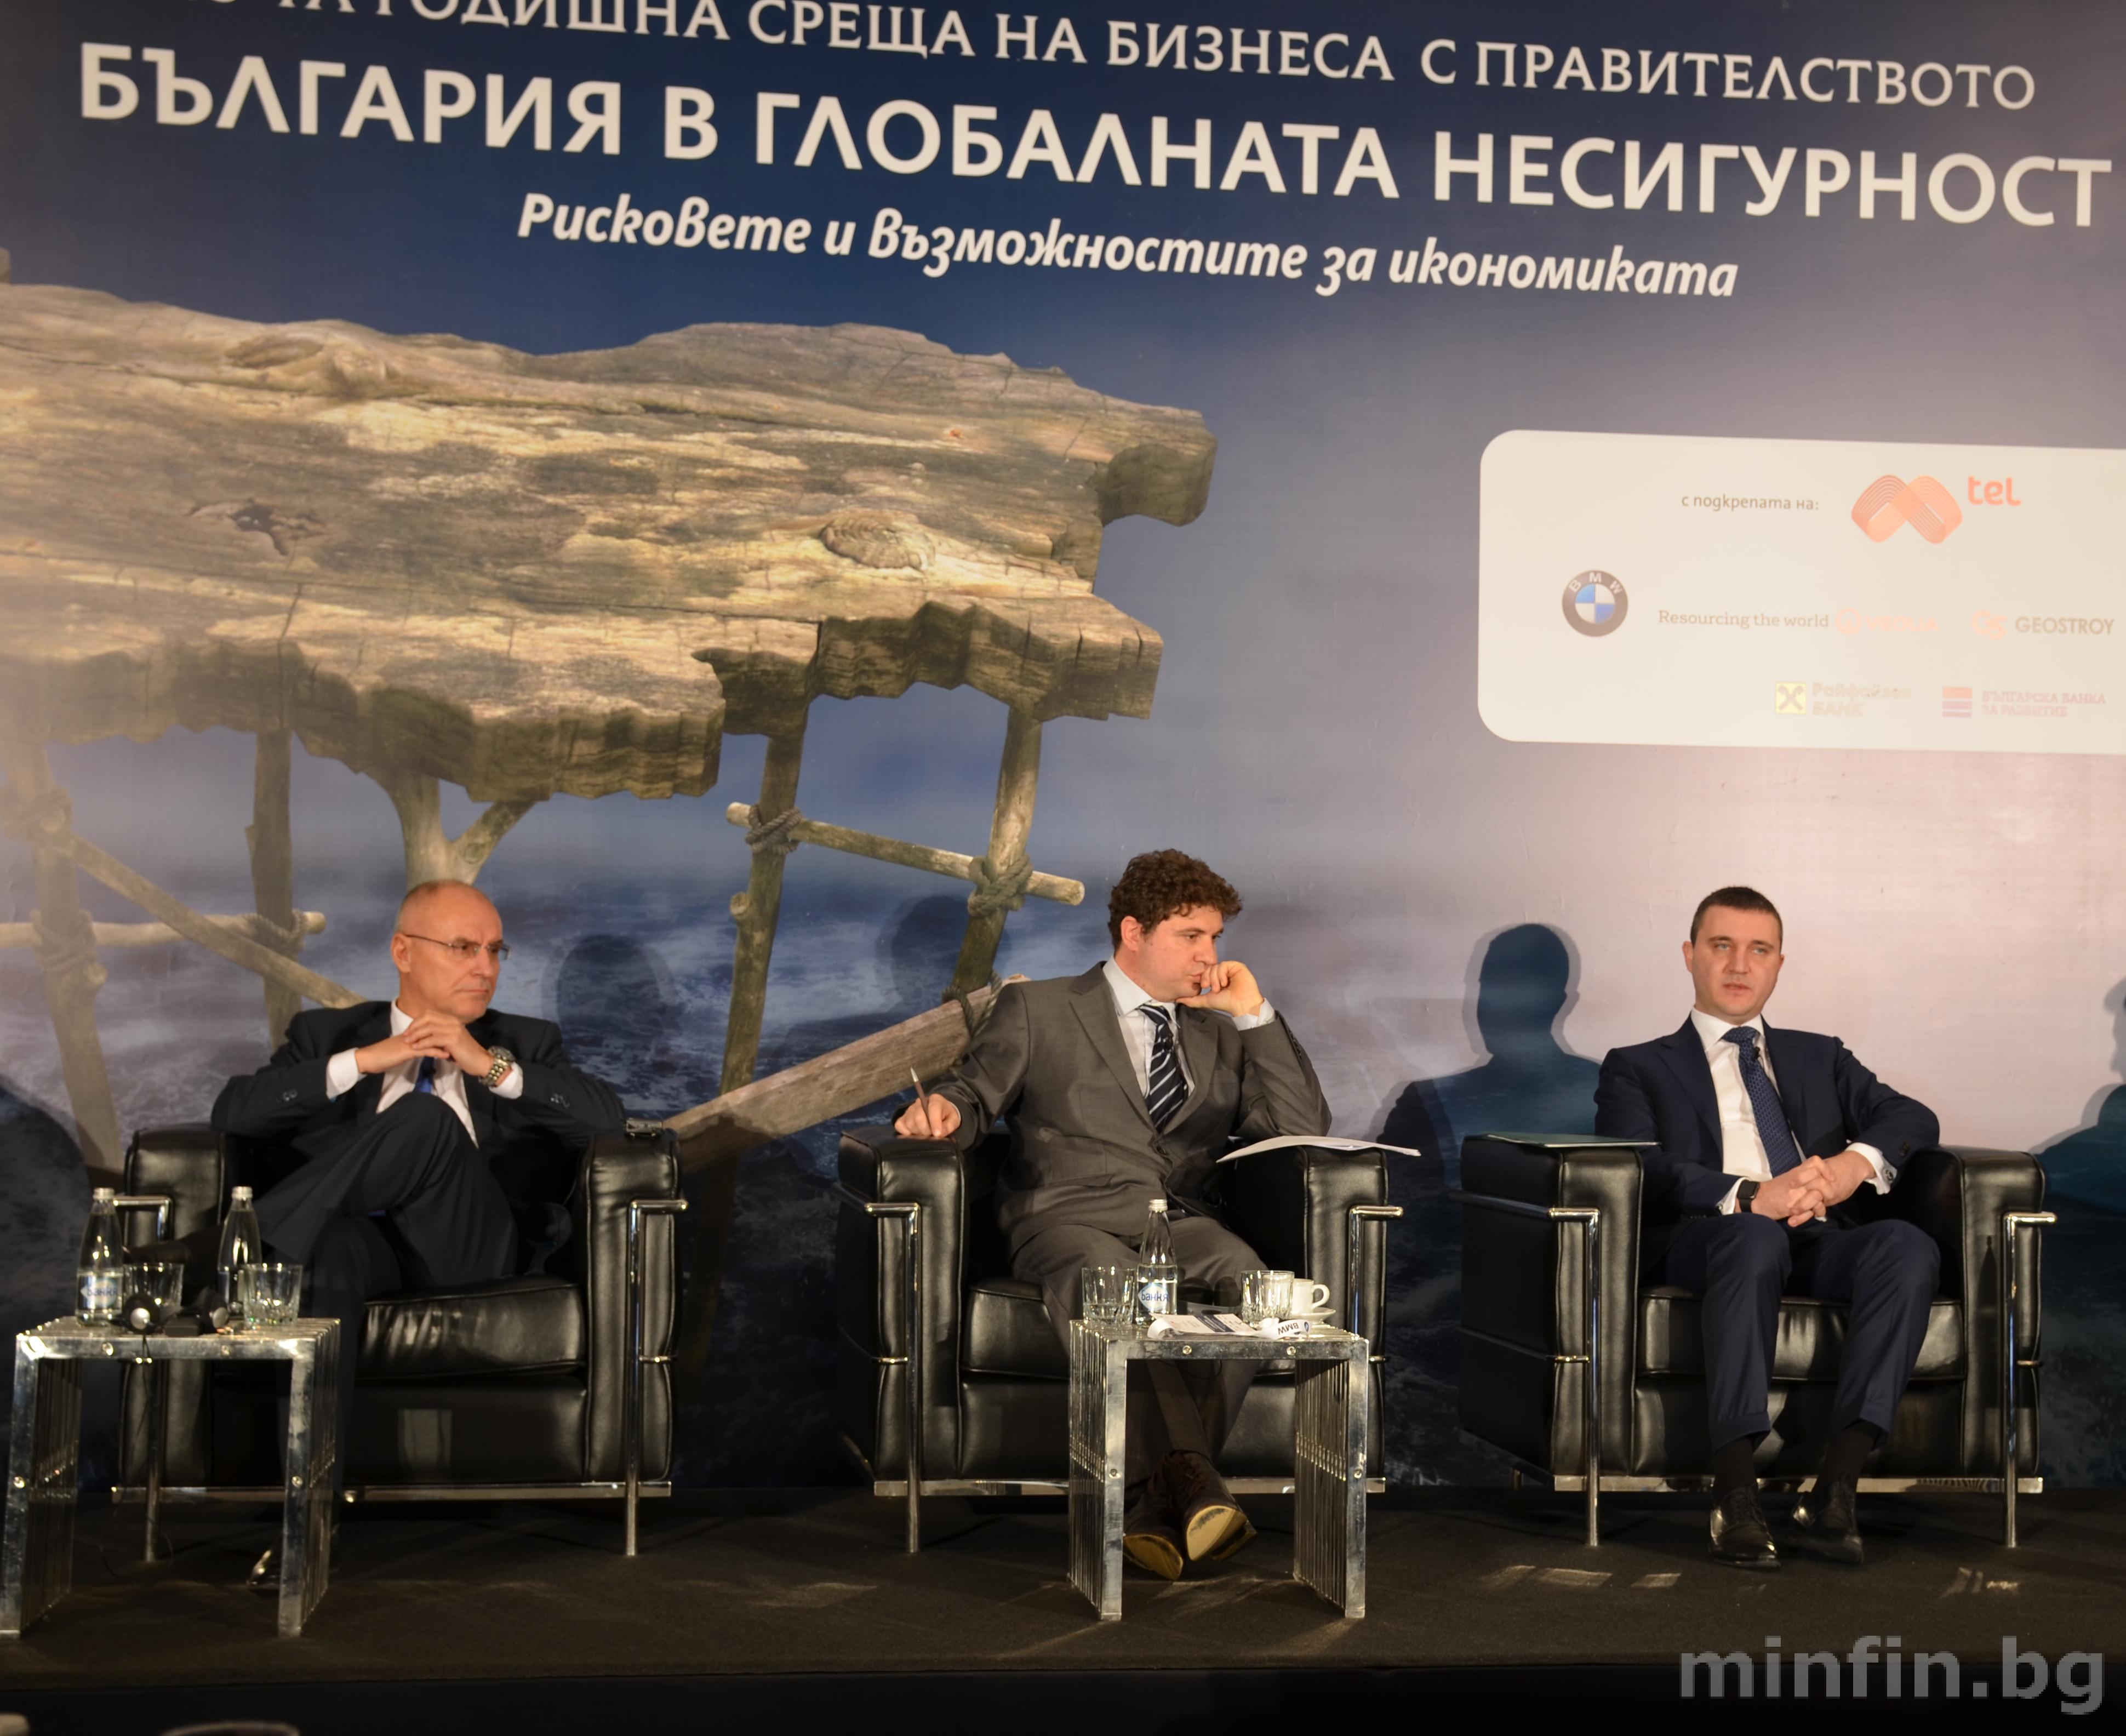 VLADISLAV GORANOV: THERE IS A POTENTIAL FOR HIGHER ECONOMIC GROWTH